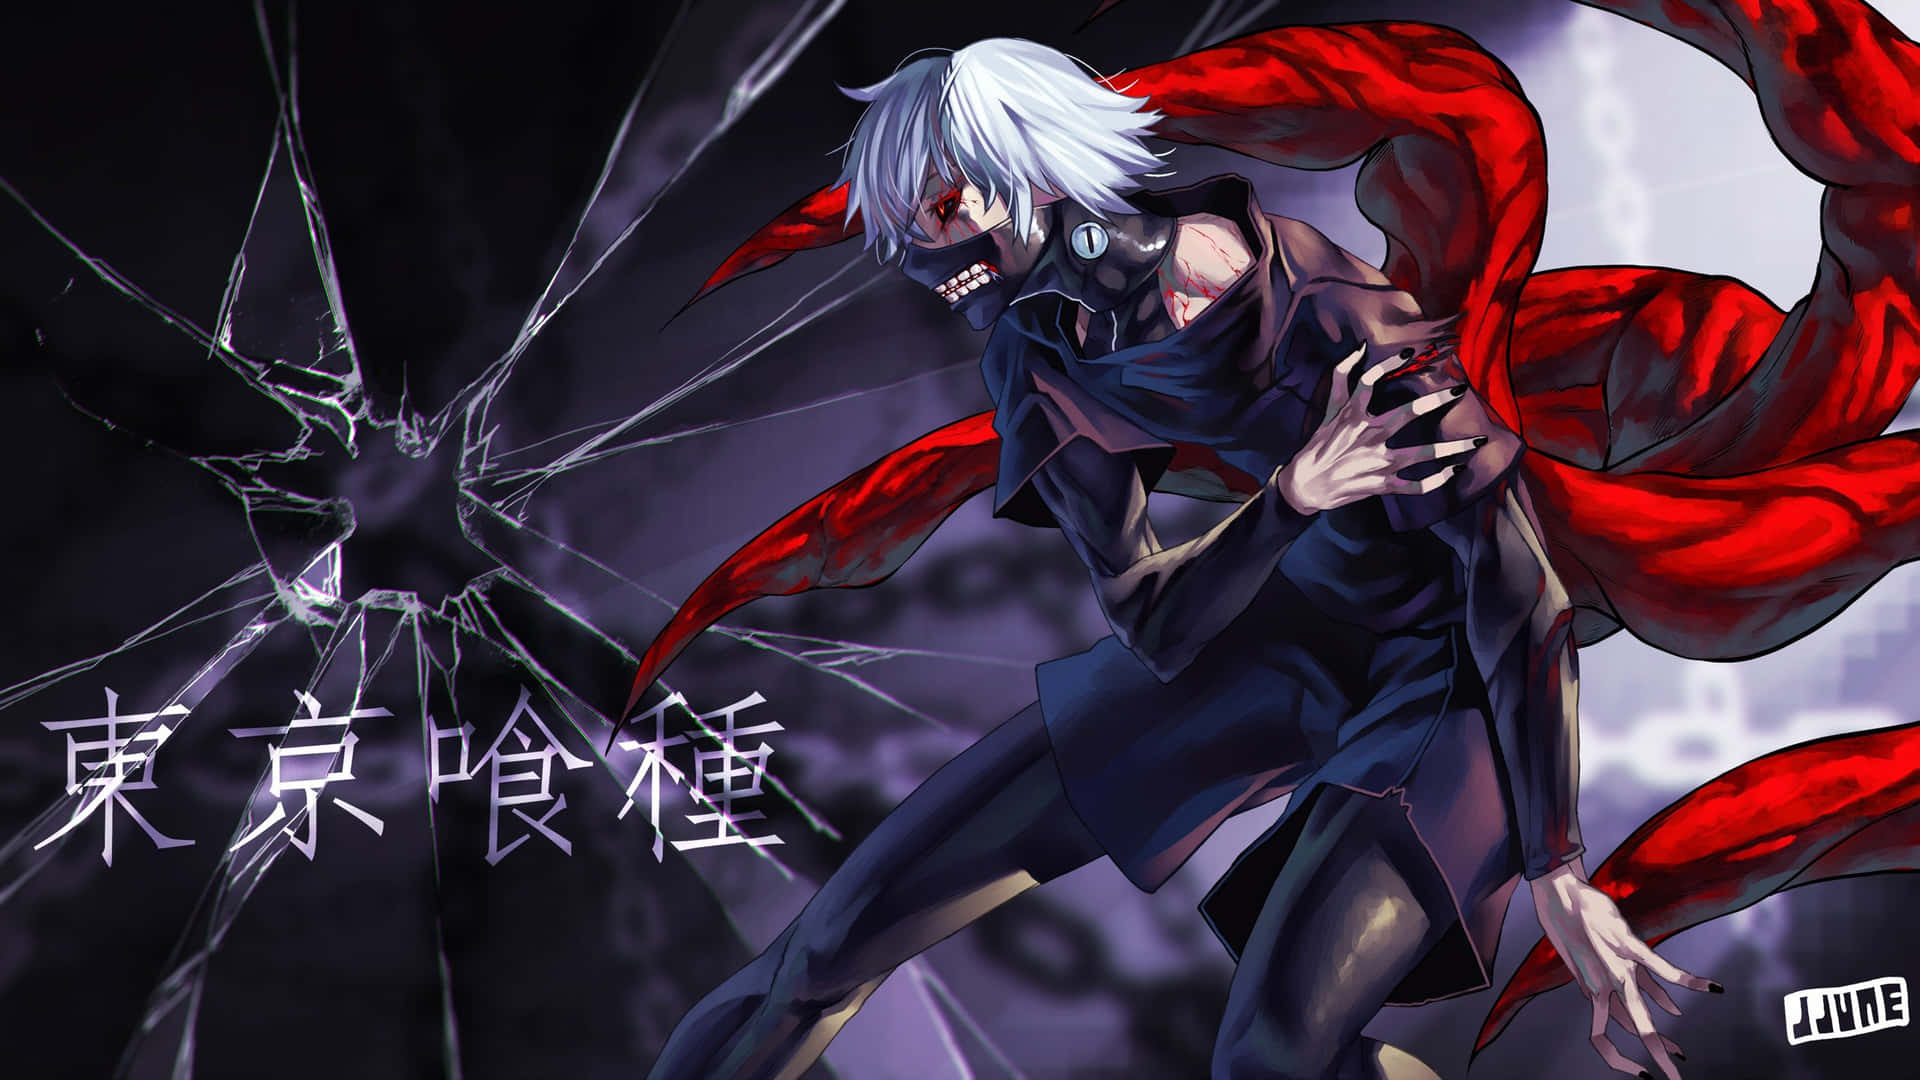 Explore The World Of Tokyo Ghoul On Your Desktop Wallpaper